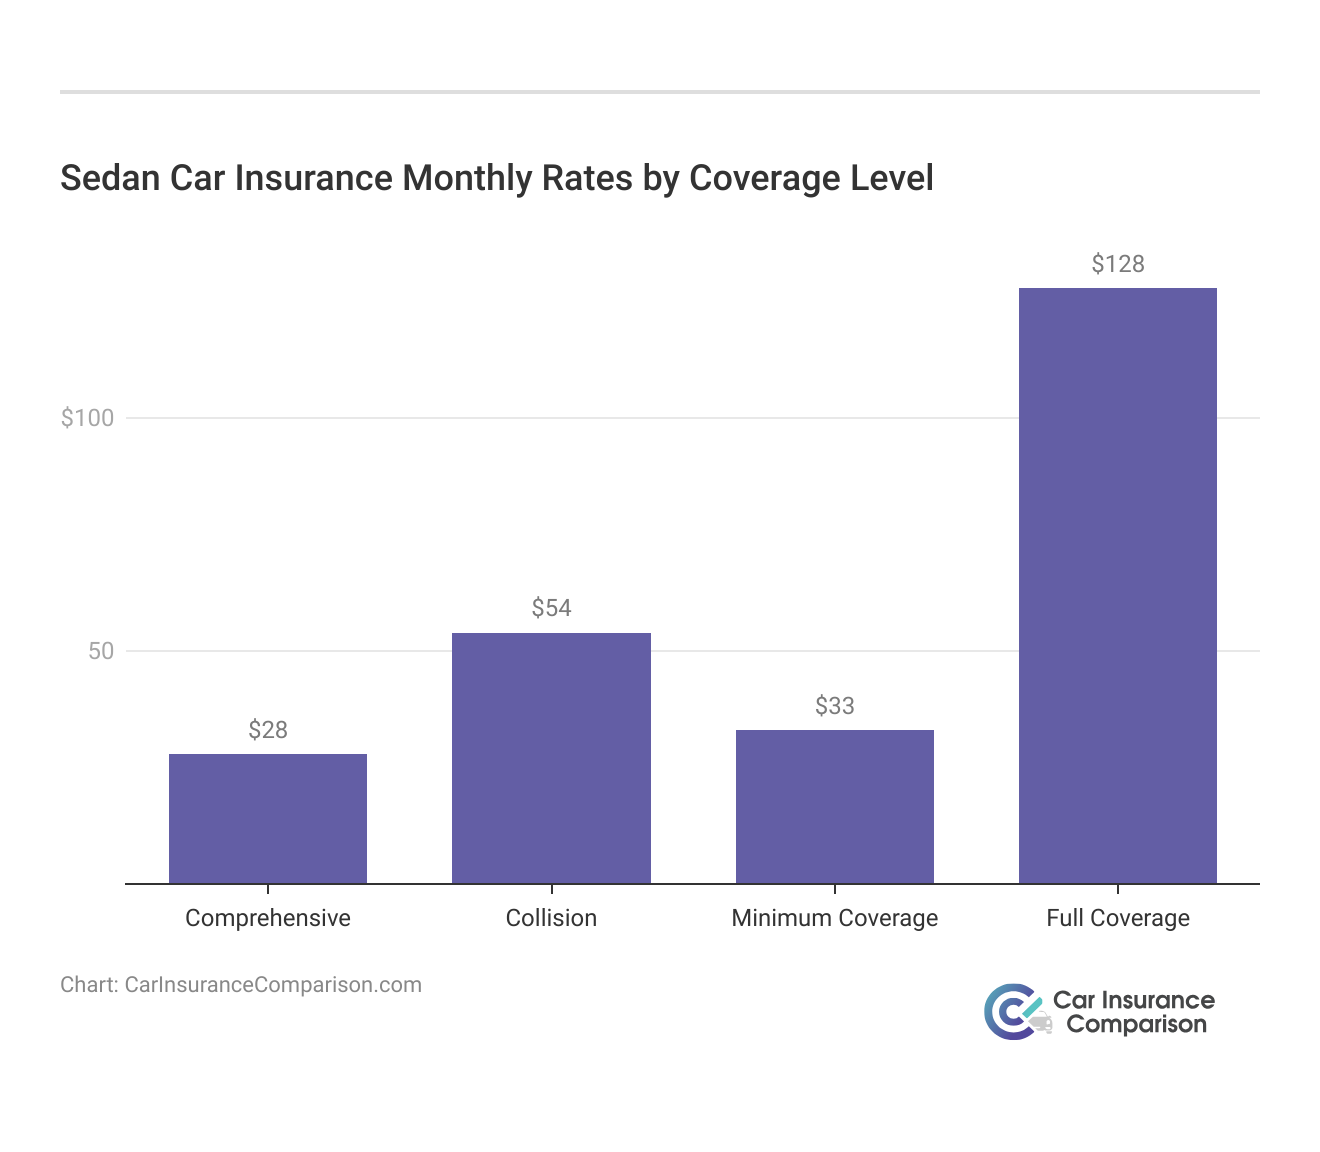 <h3>Sedan Car Insurance Monthly Rates by Coverage Level</h3>